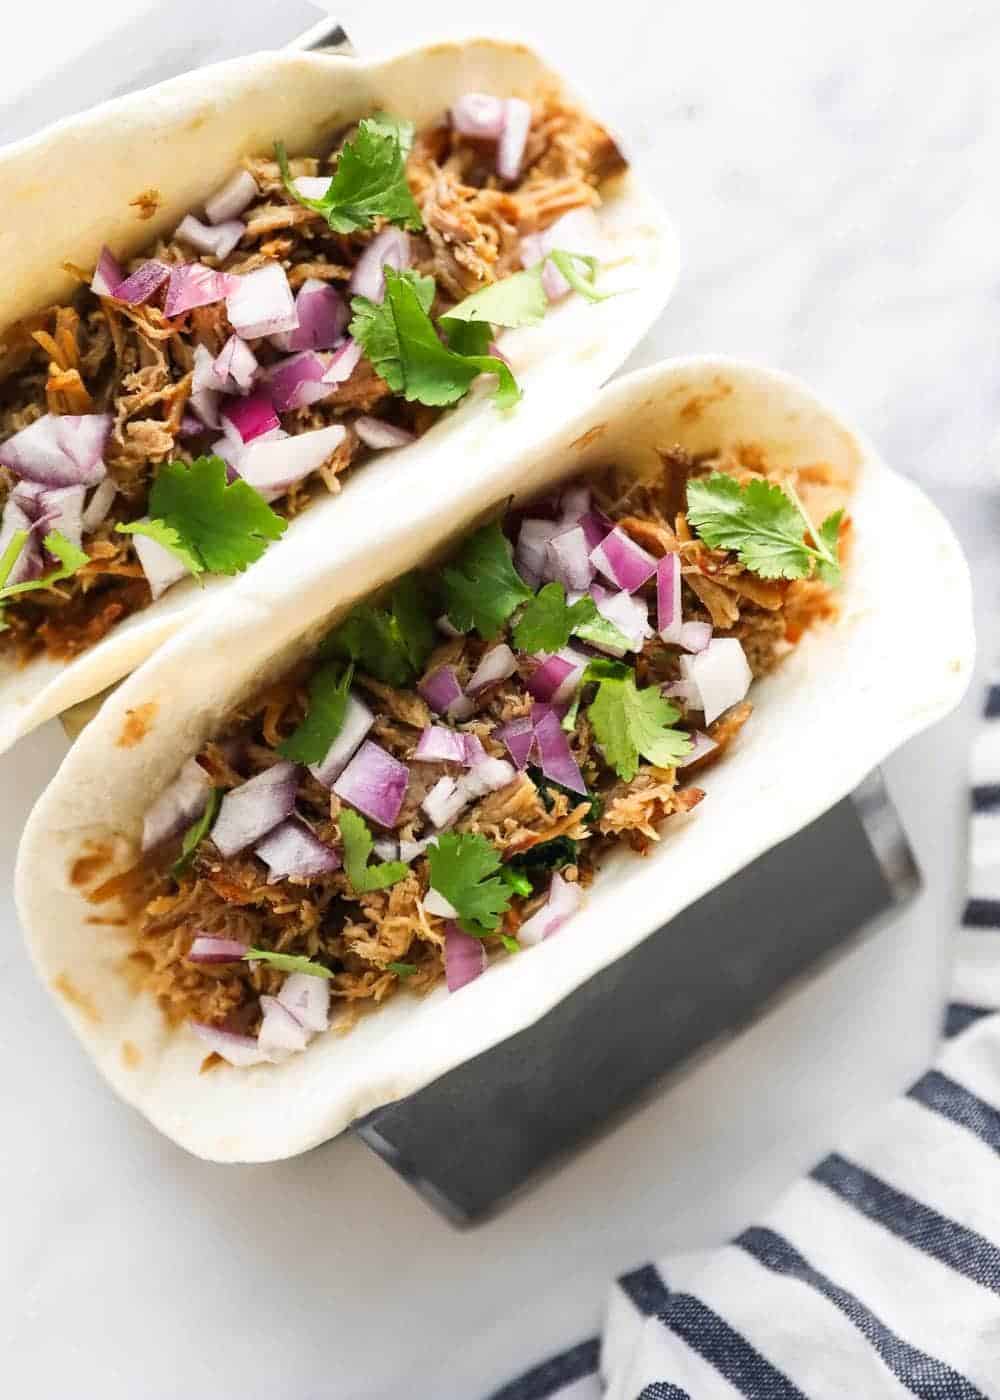 carnitas tacos on a taco holder stand 